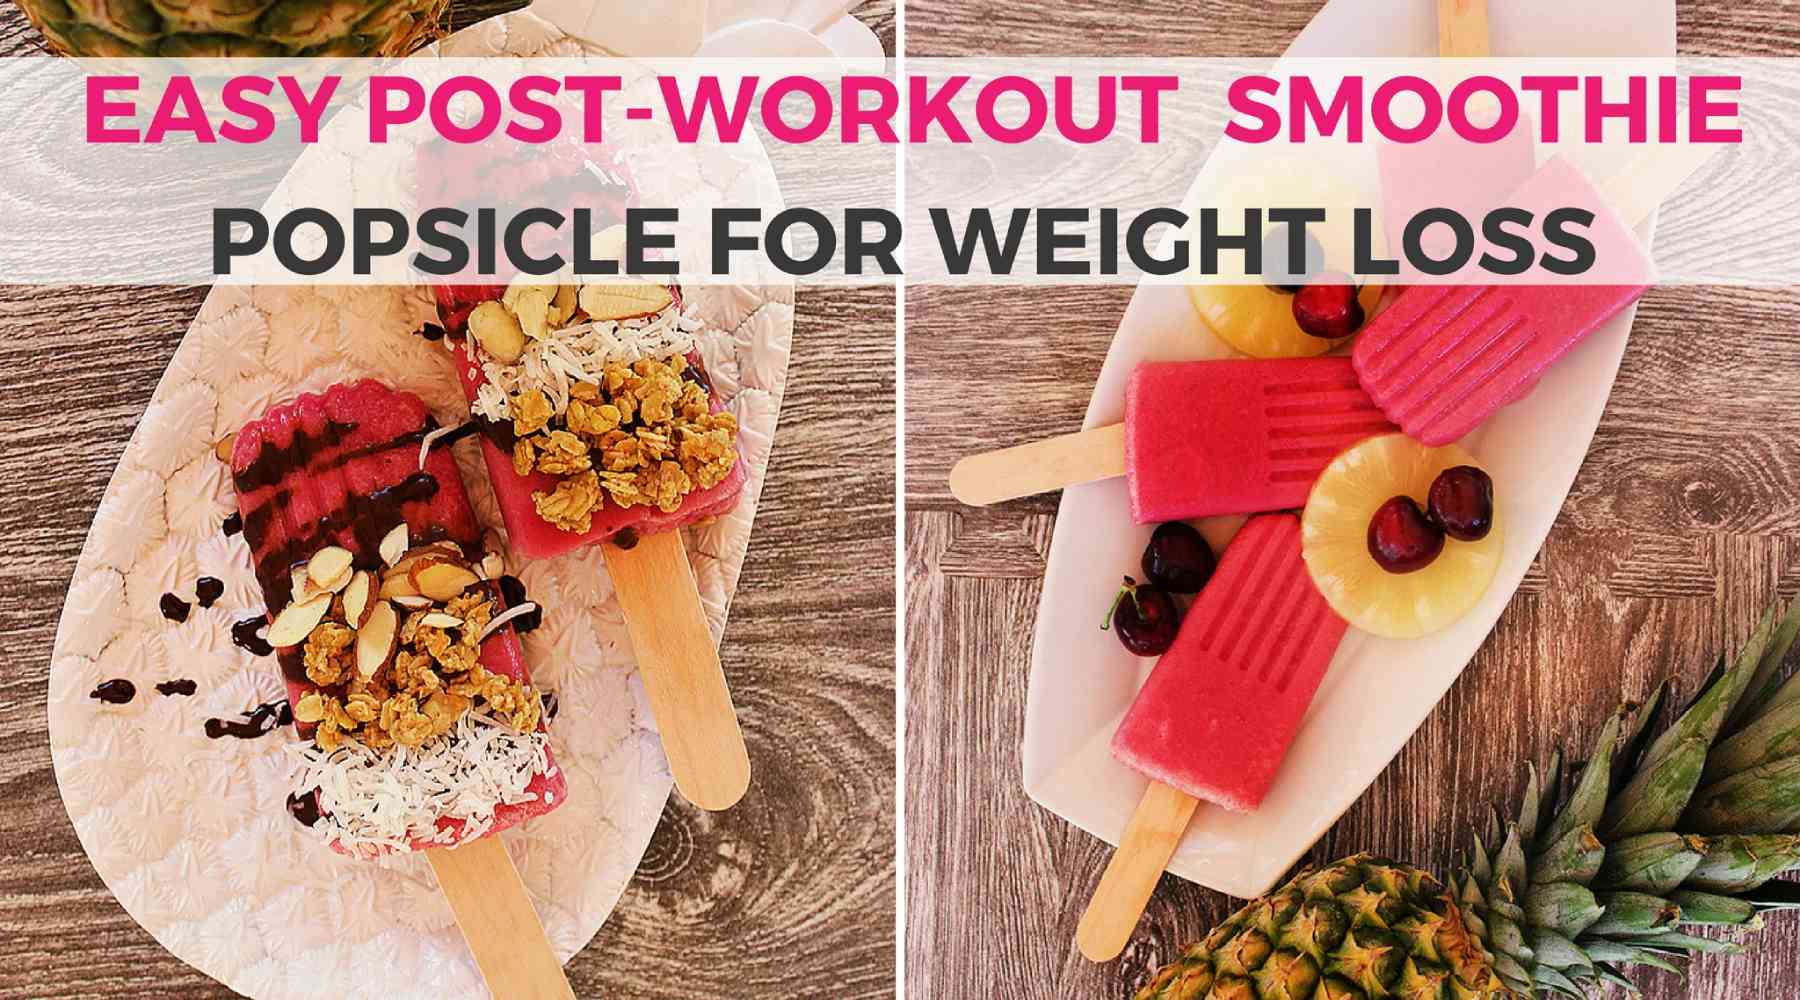 How to Turn Your Post-Workout Fruit Smoothie Into A Healthy Popsicle: The hot, sunny weather has finally arrived & what better way to cool down post-workout than with a delicious popsicle filled with healthy ingredients to help you in your muscle recove